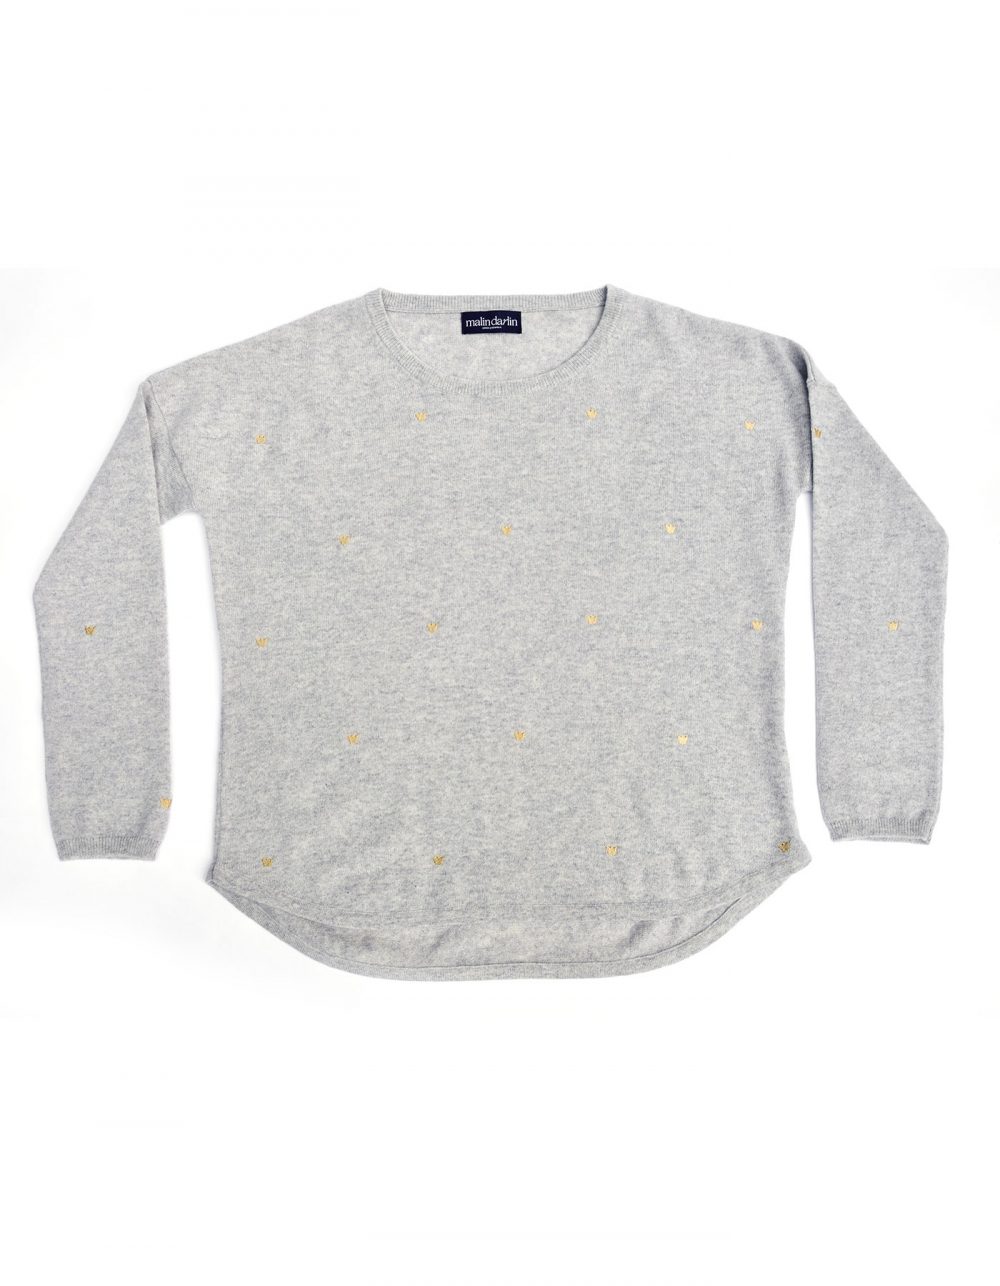 Hundred Crowns Cashmere Jumper by Malin Darlin